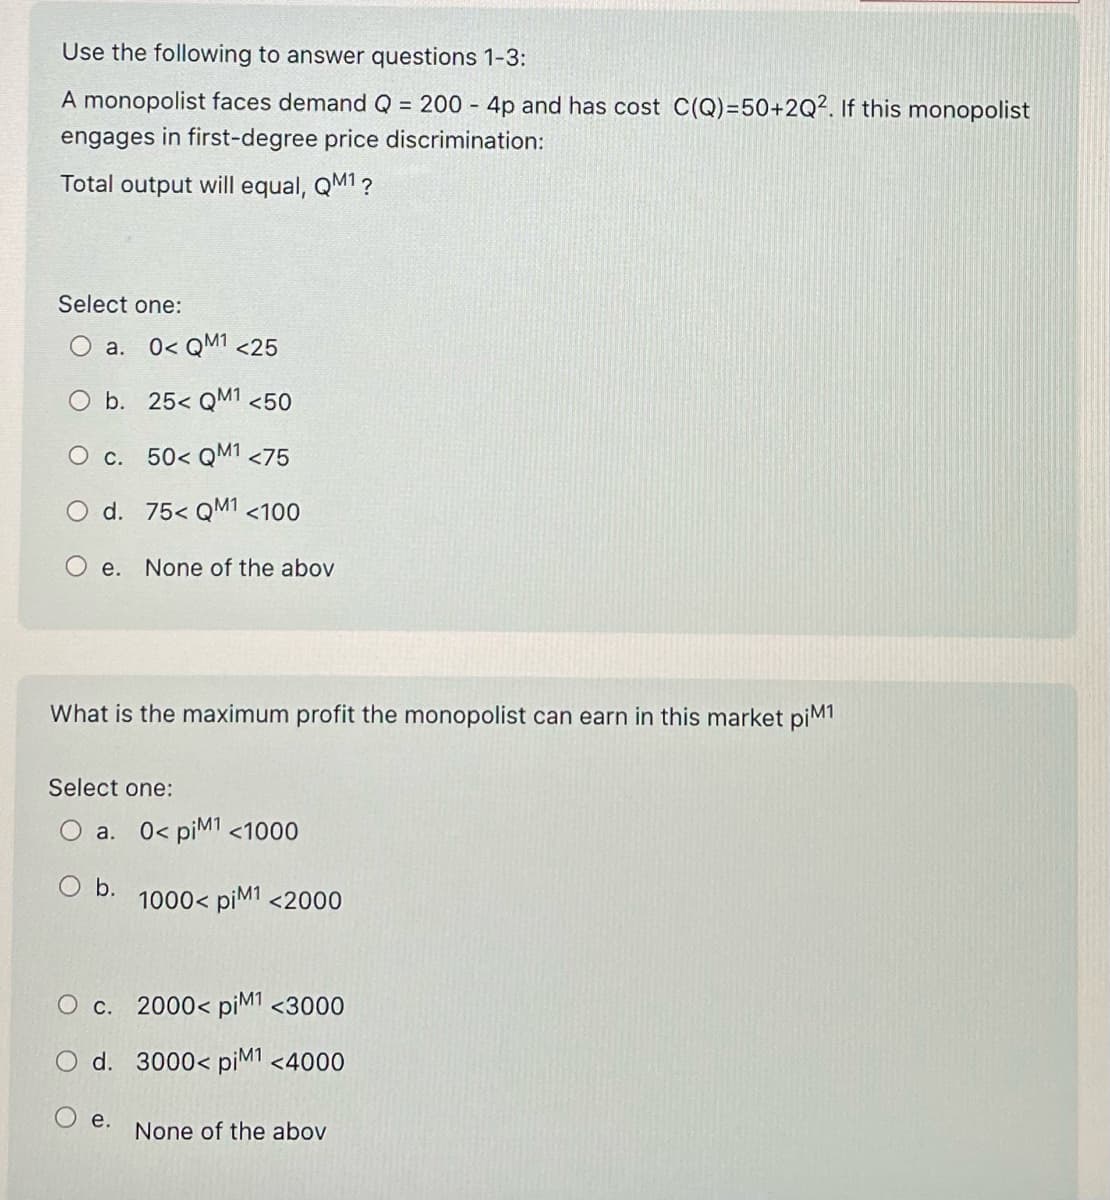 Use the following to answer questions 1-3:
A monopolist faces demand Q = 200 - 4p and has cost C(Q)=50+2Q2. If this monopolist
engages in first-degree price discrimination:
Total output will equal, QM1 ?
Select one:
a. 0< QM¹ <25
b.
25< QM¹ <50
O c. 50< QM1 <75
d. 75< QM1 <100
e. None of the abov
What is the maximum profit the monopolist can earn in this market piM1
Select one:
a. 0< piM1 <1000
O b.
O c.
O d.
Oe.
1000< piM1 <2000
2000< piM1 <3000
3000< piM1 <4000
None of the abov